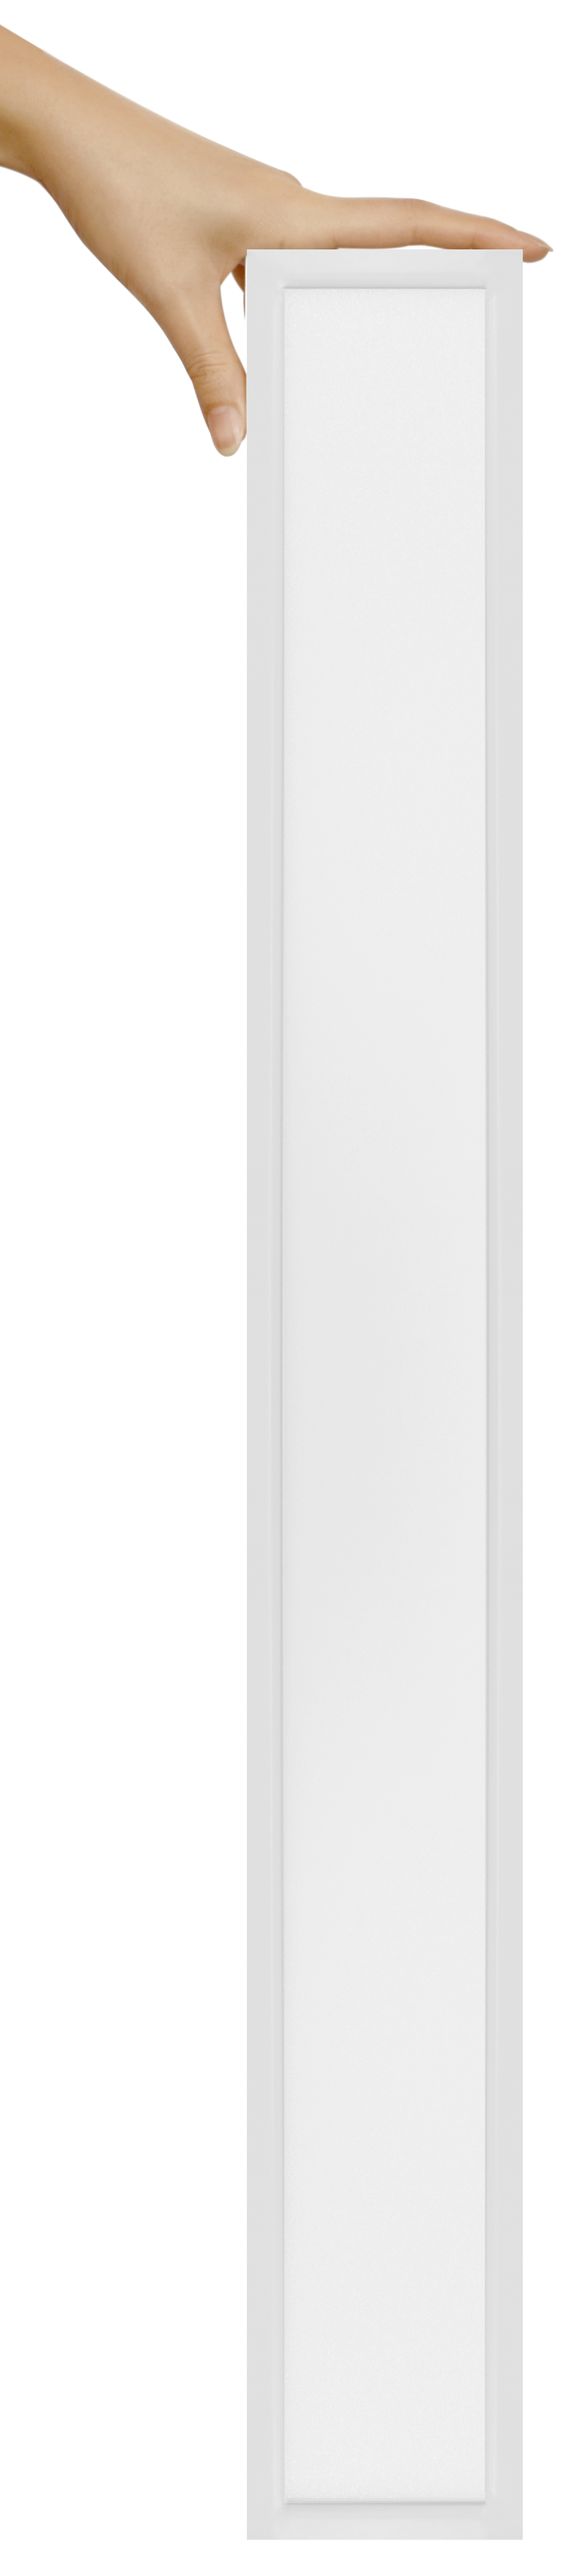 4FT Slim 4" Linear Recessed Light, 3400 Lumen Max, Wattage and CCT Selectable, 110-277V